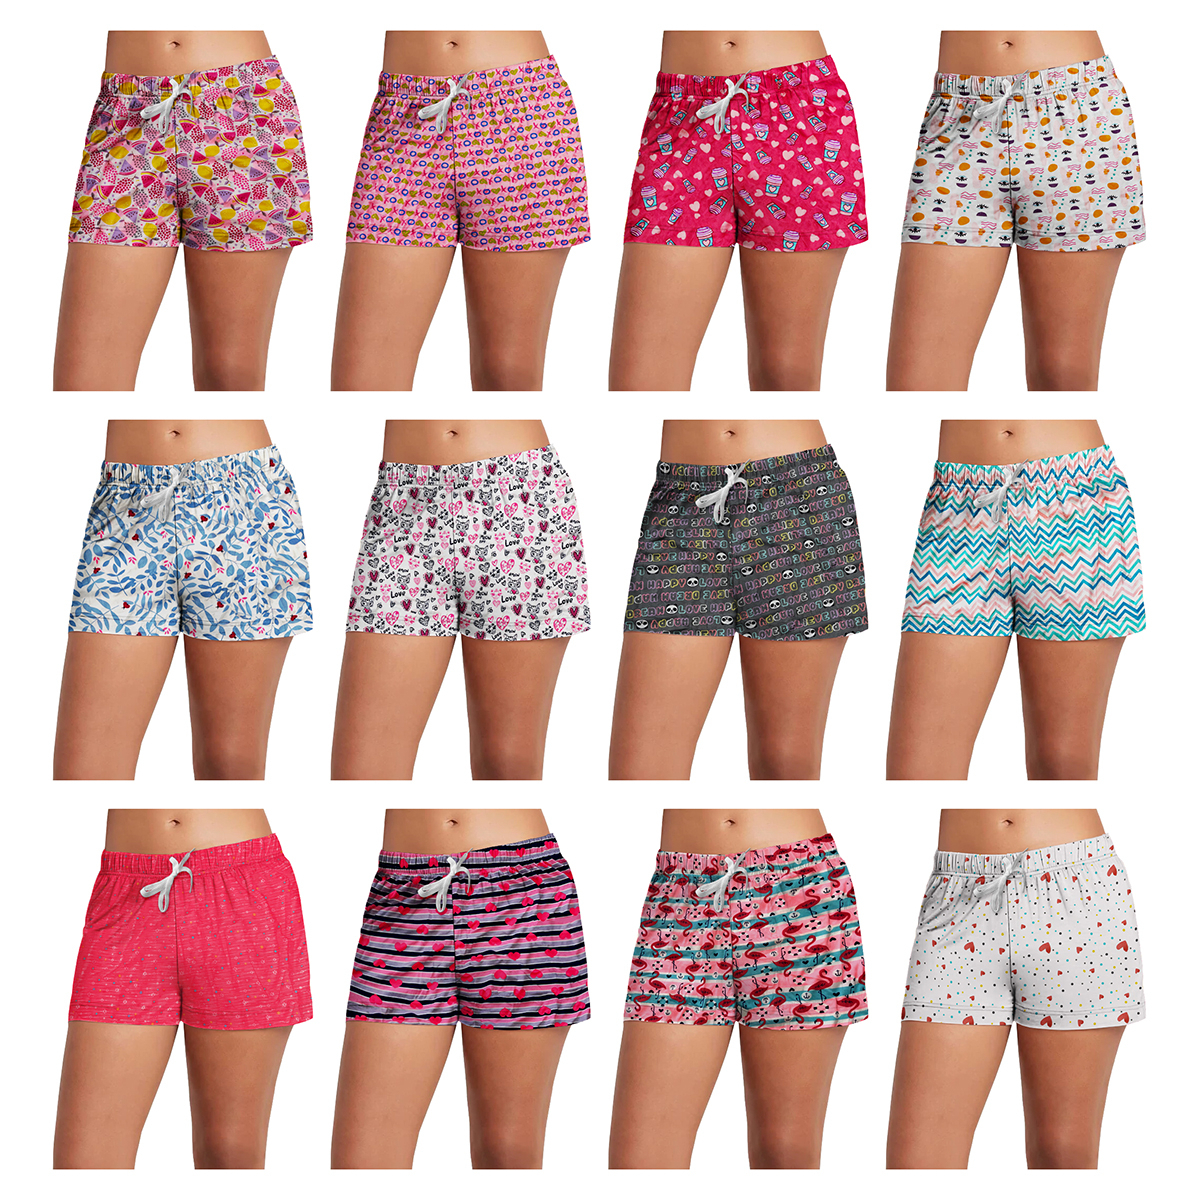 Women's Comfy Lounge Bottom Pajama Shorts With Drawstring (4 Pairs) - Small